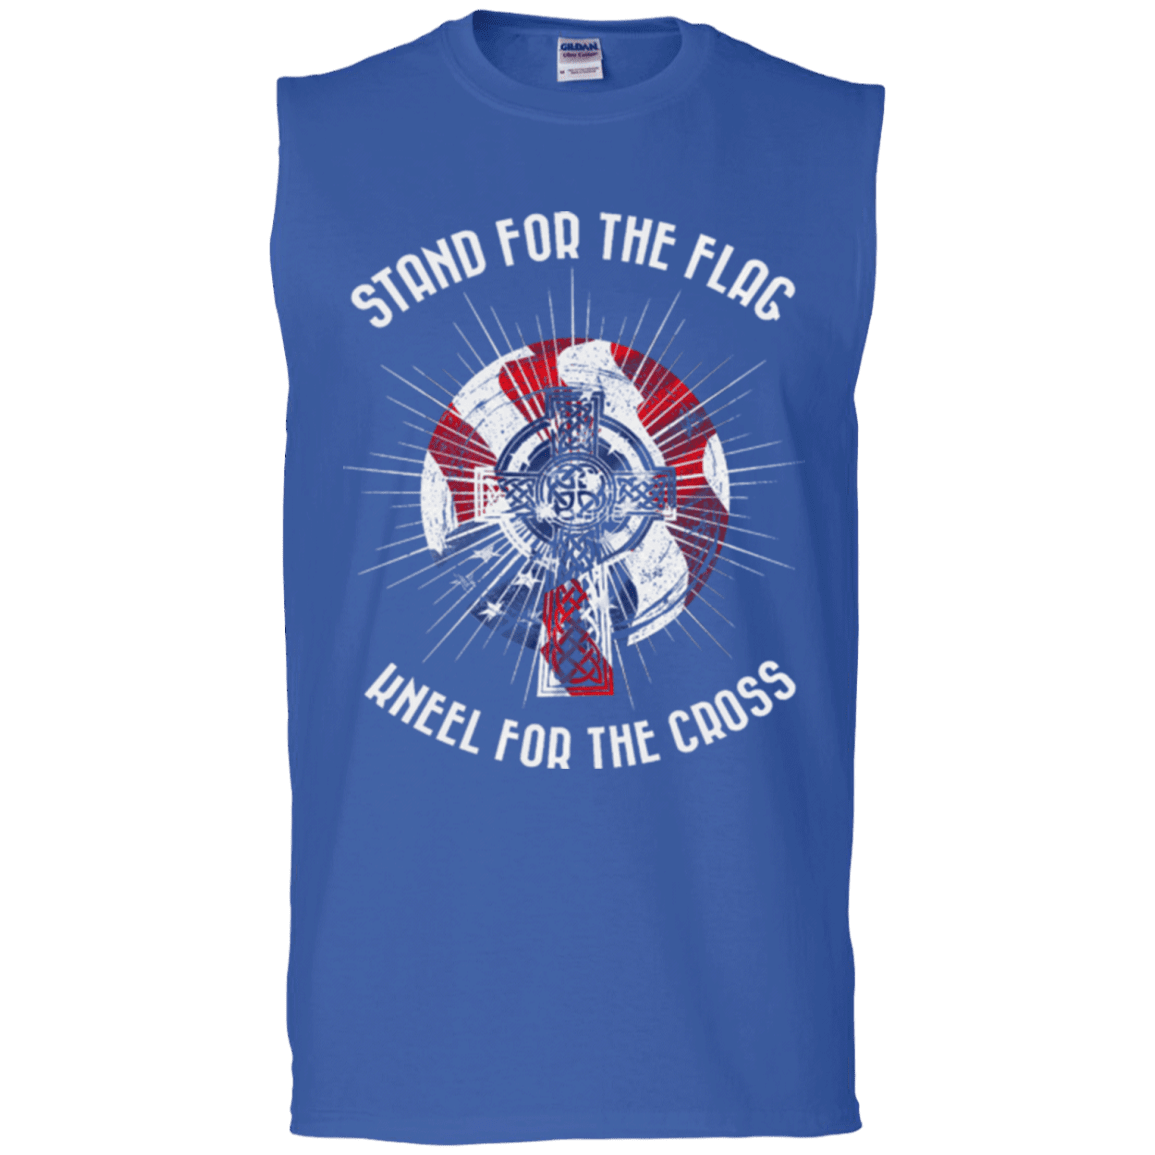 Military T-Shirt "Stand For The Flag Kneel For The Cross"-TShirt-General-Veterans Nation